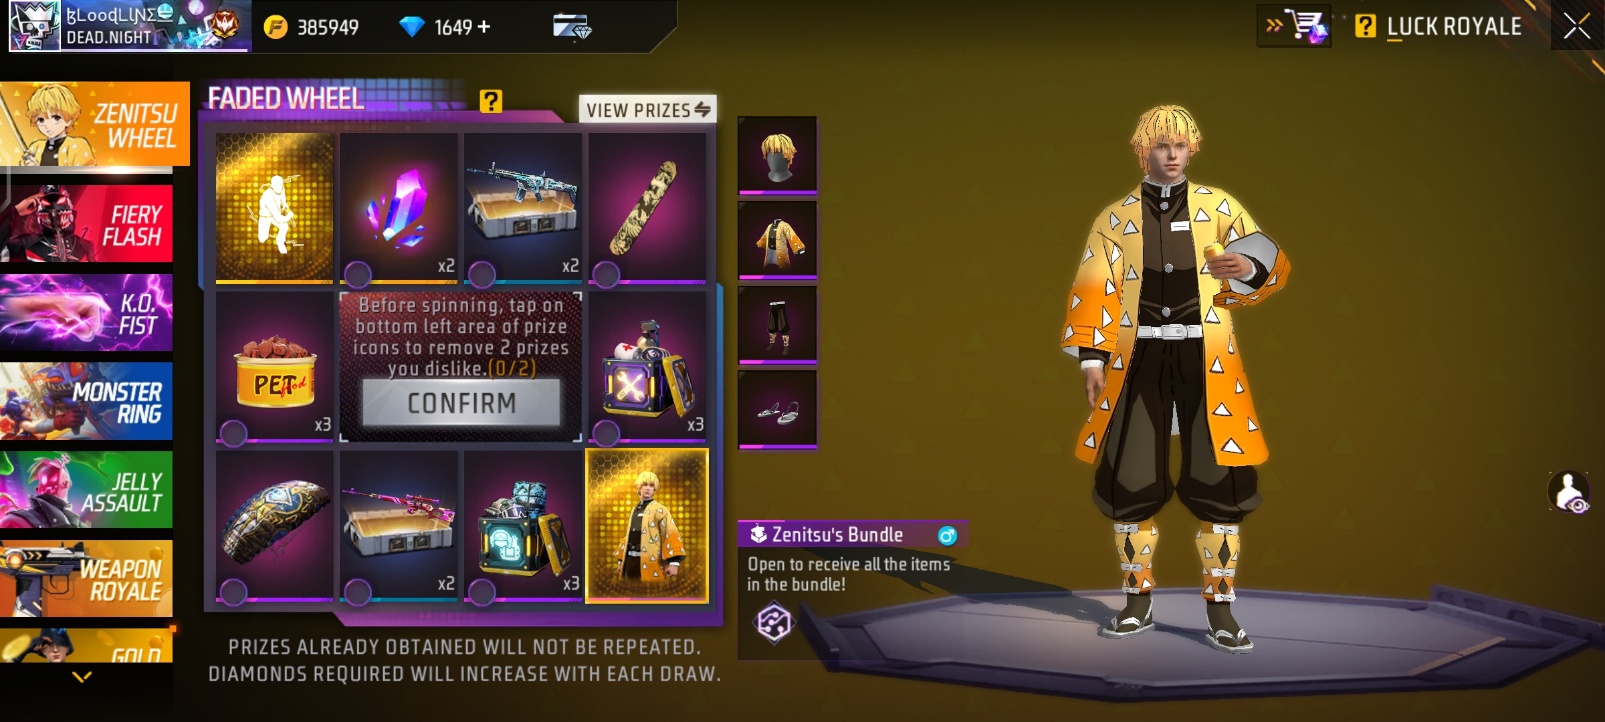 How To Get The Zenitsu Bundle In Free Fire Max